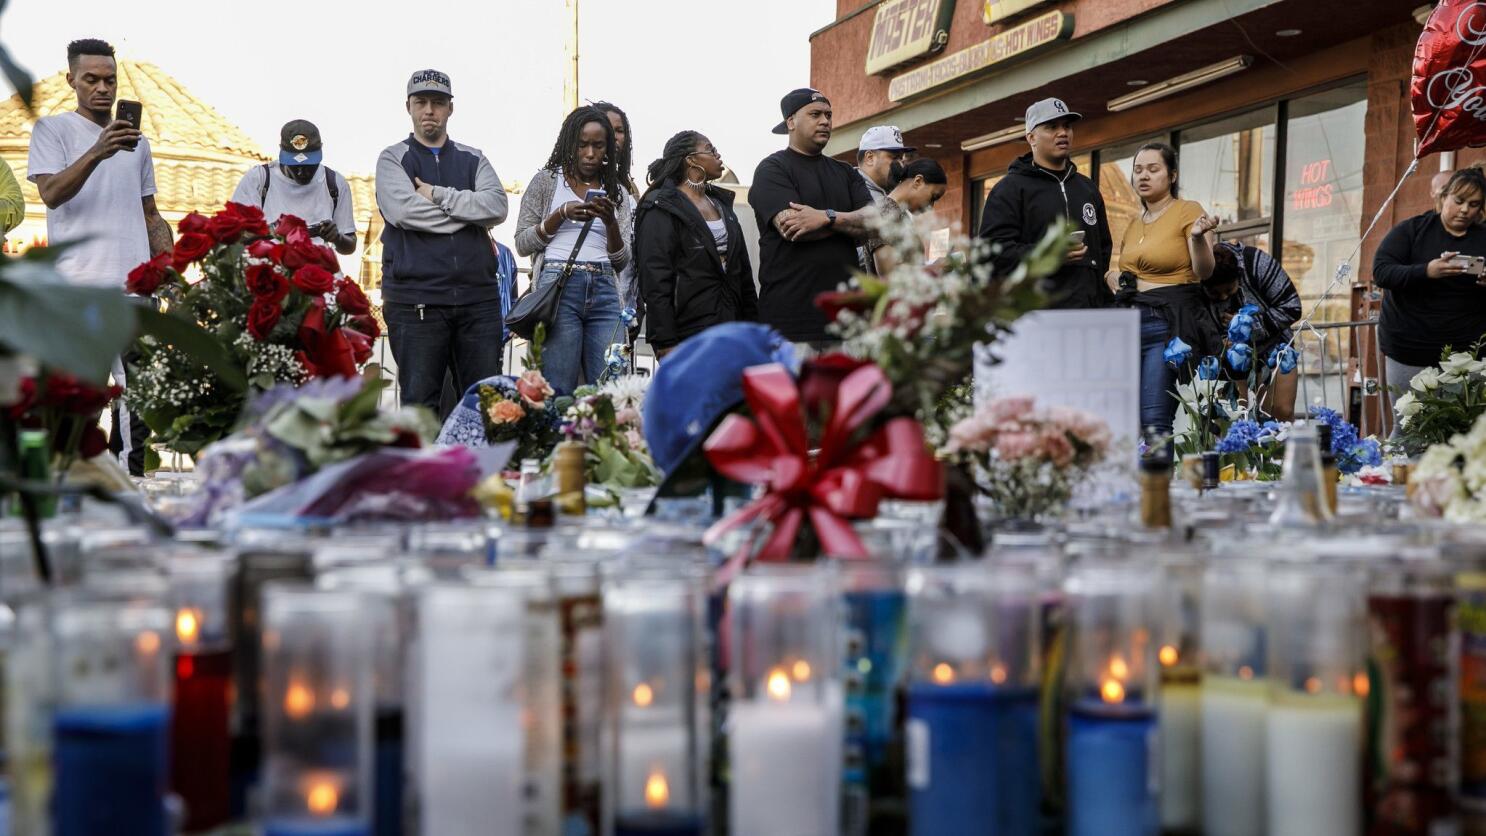 Nipsey Hussle's Marathon store is sacred ground for mourners from